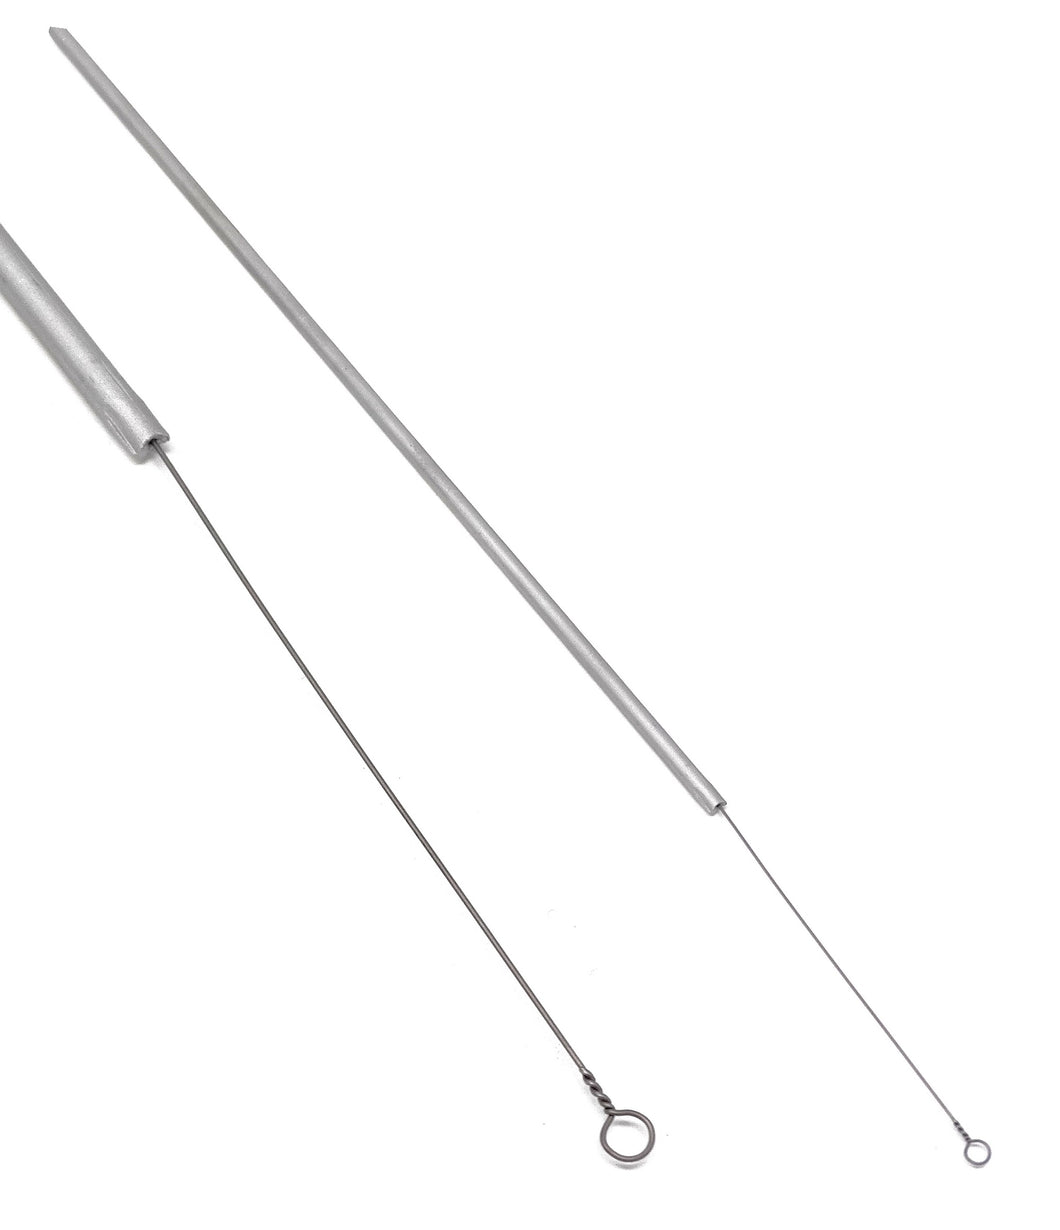 A2ZSCILAB Bacterial Inoculating Loop 3 mm, Single Nichrome Wire, With Aluminum Handle